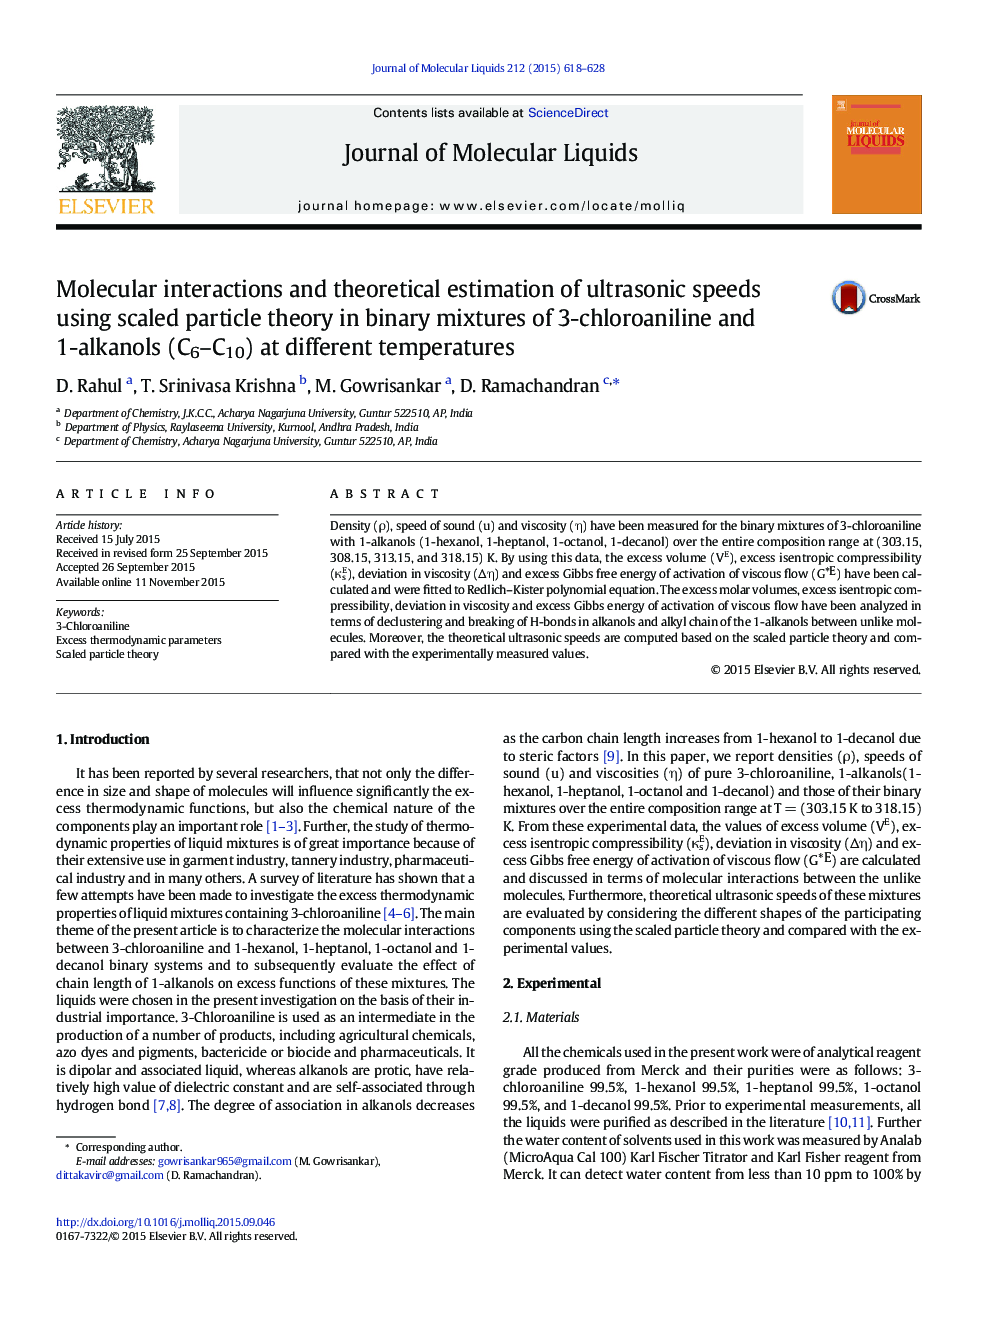 Molecular interactions and theoretical estimation of ultrasonic speeds using scaled particle theory in binary mixtures of 3-chloroaniline and 1-alkanols (C6-C10) at different temperatures